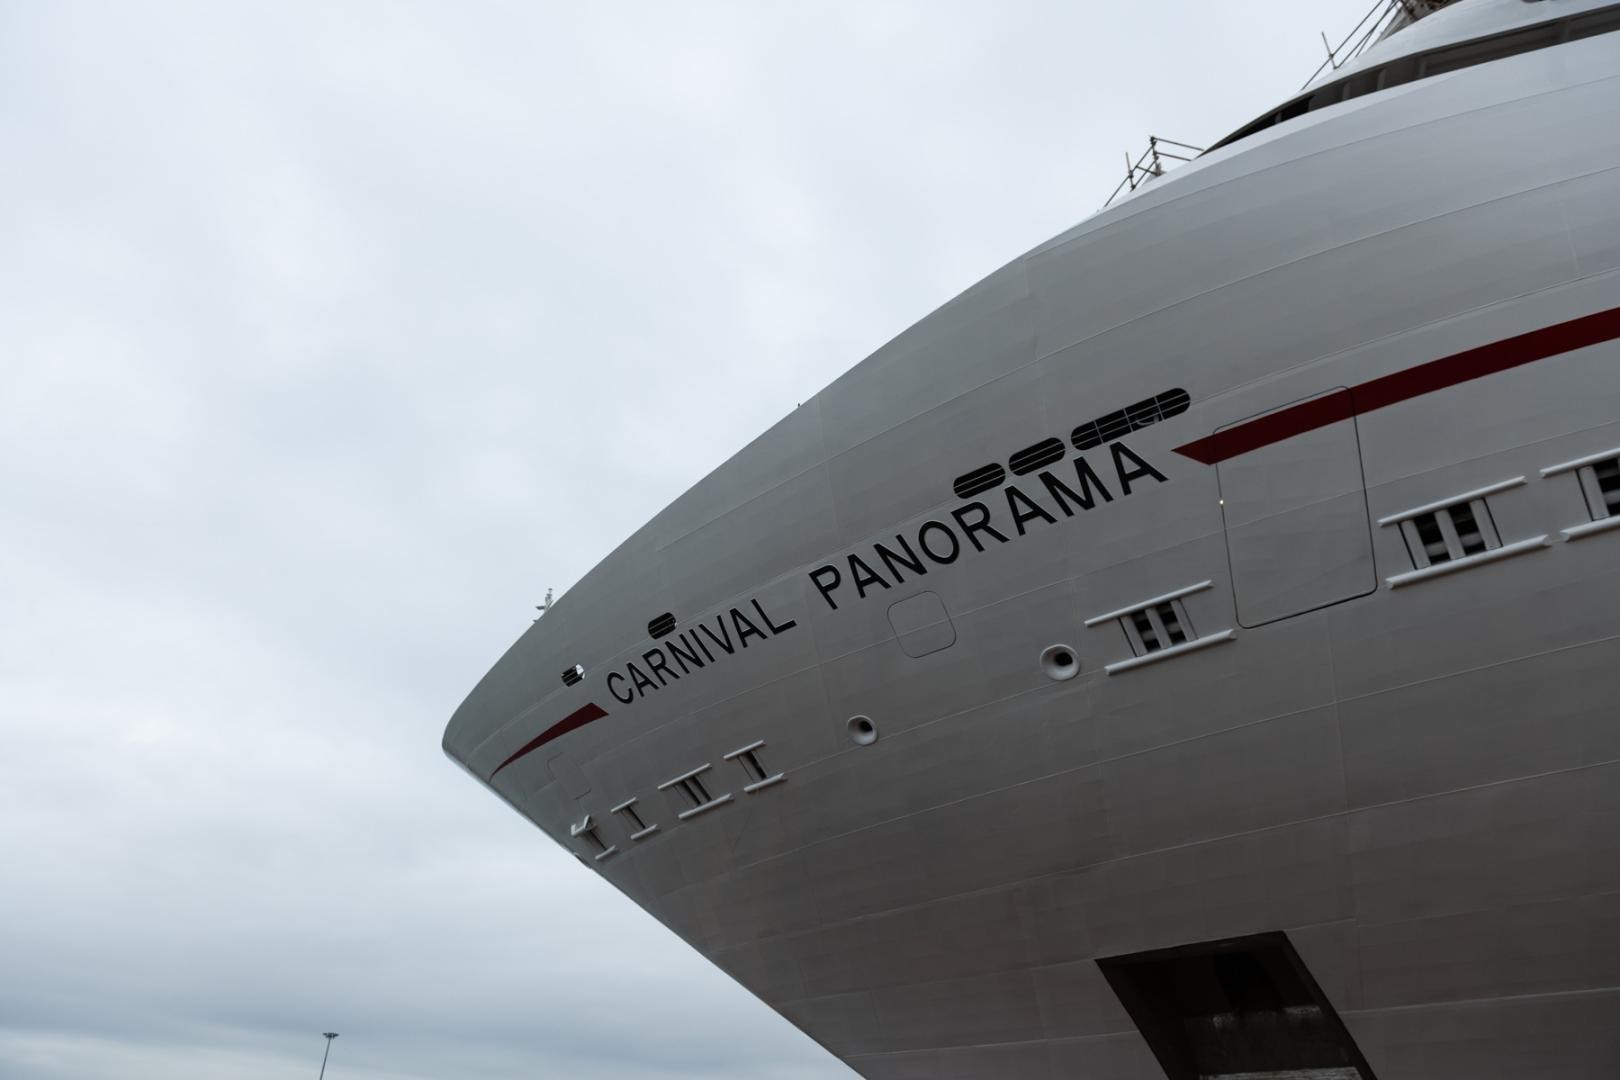 Carnival Panorama  was launched today